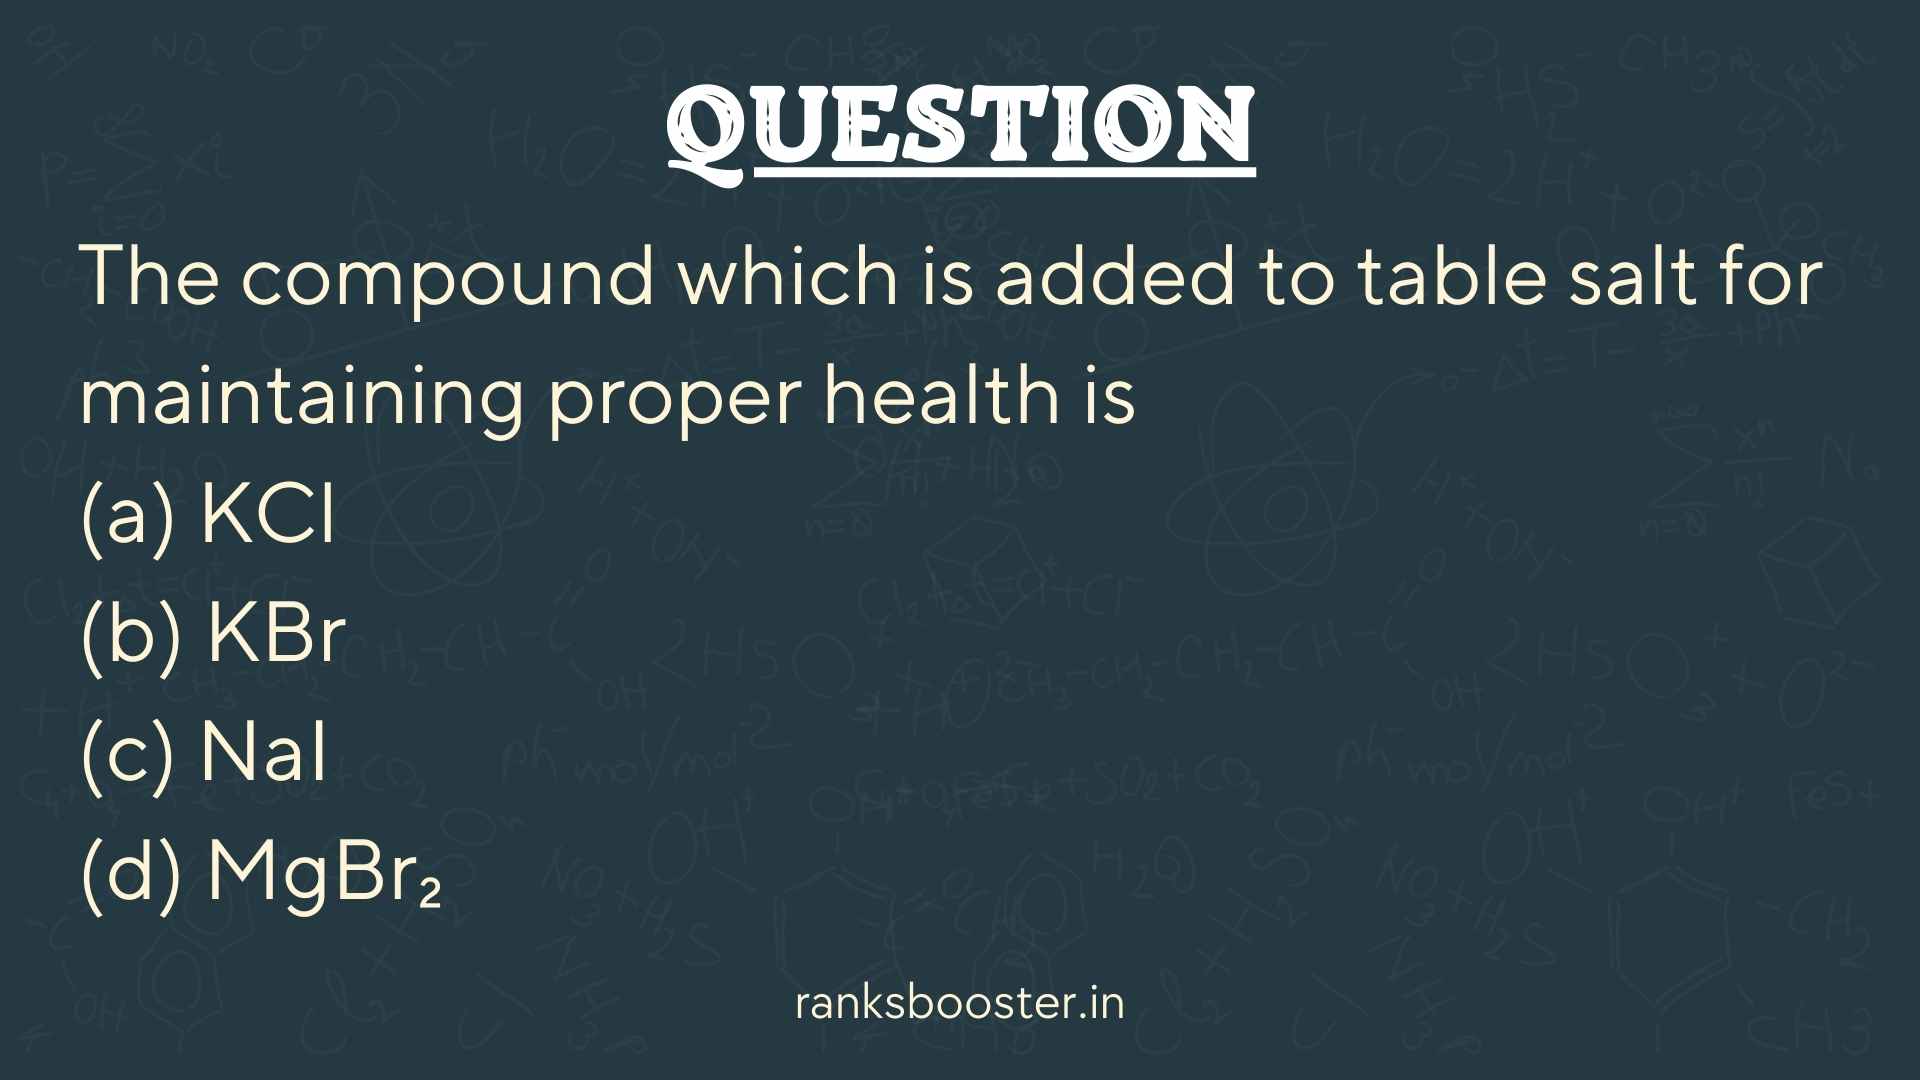 Question: The compound which is added to table salt for maintaining proper health is (a) KCl (b) KBr (c) NaI (d) MgBr₂